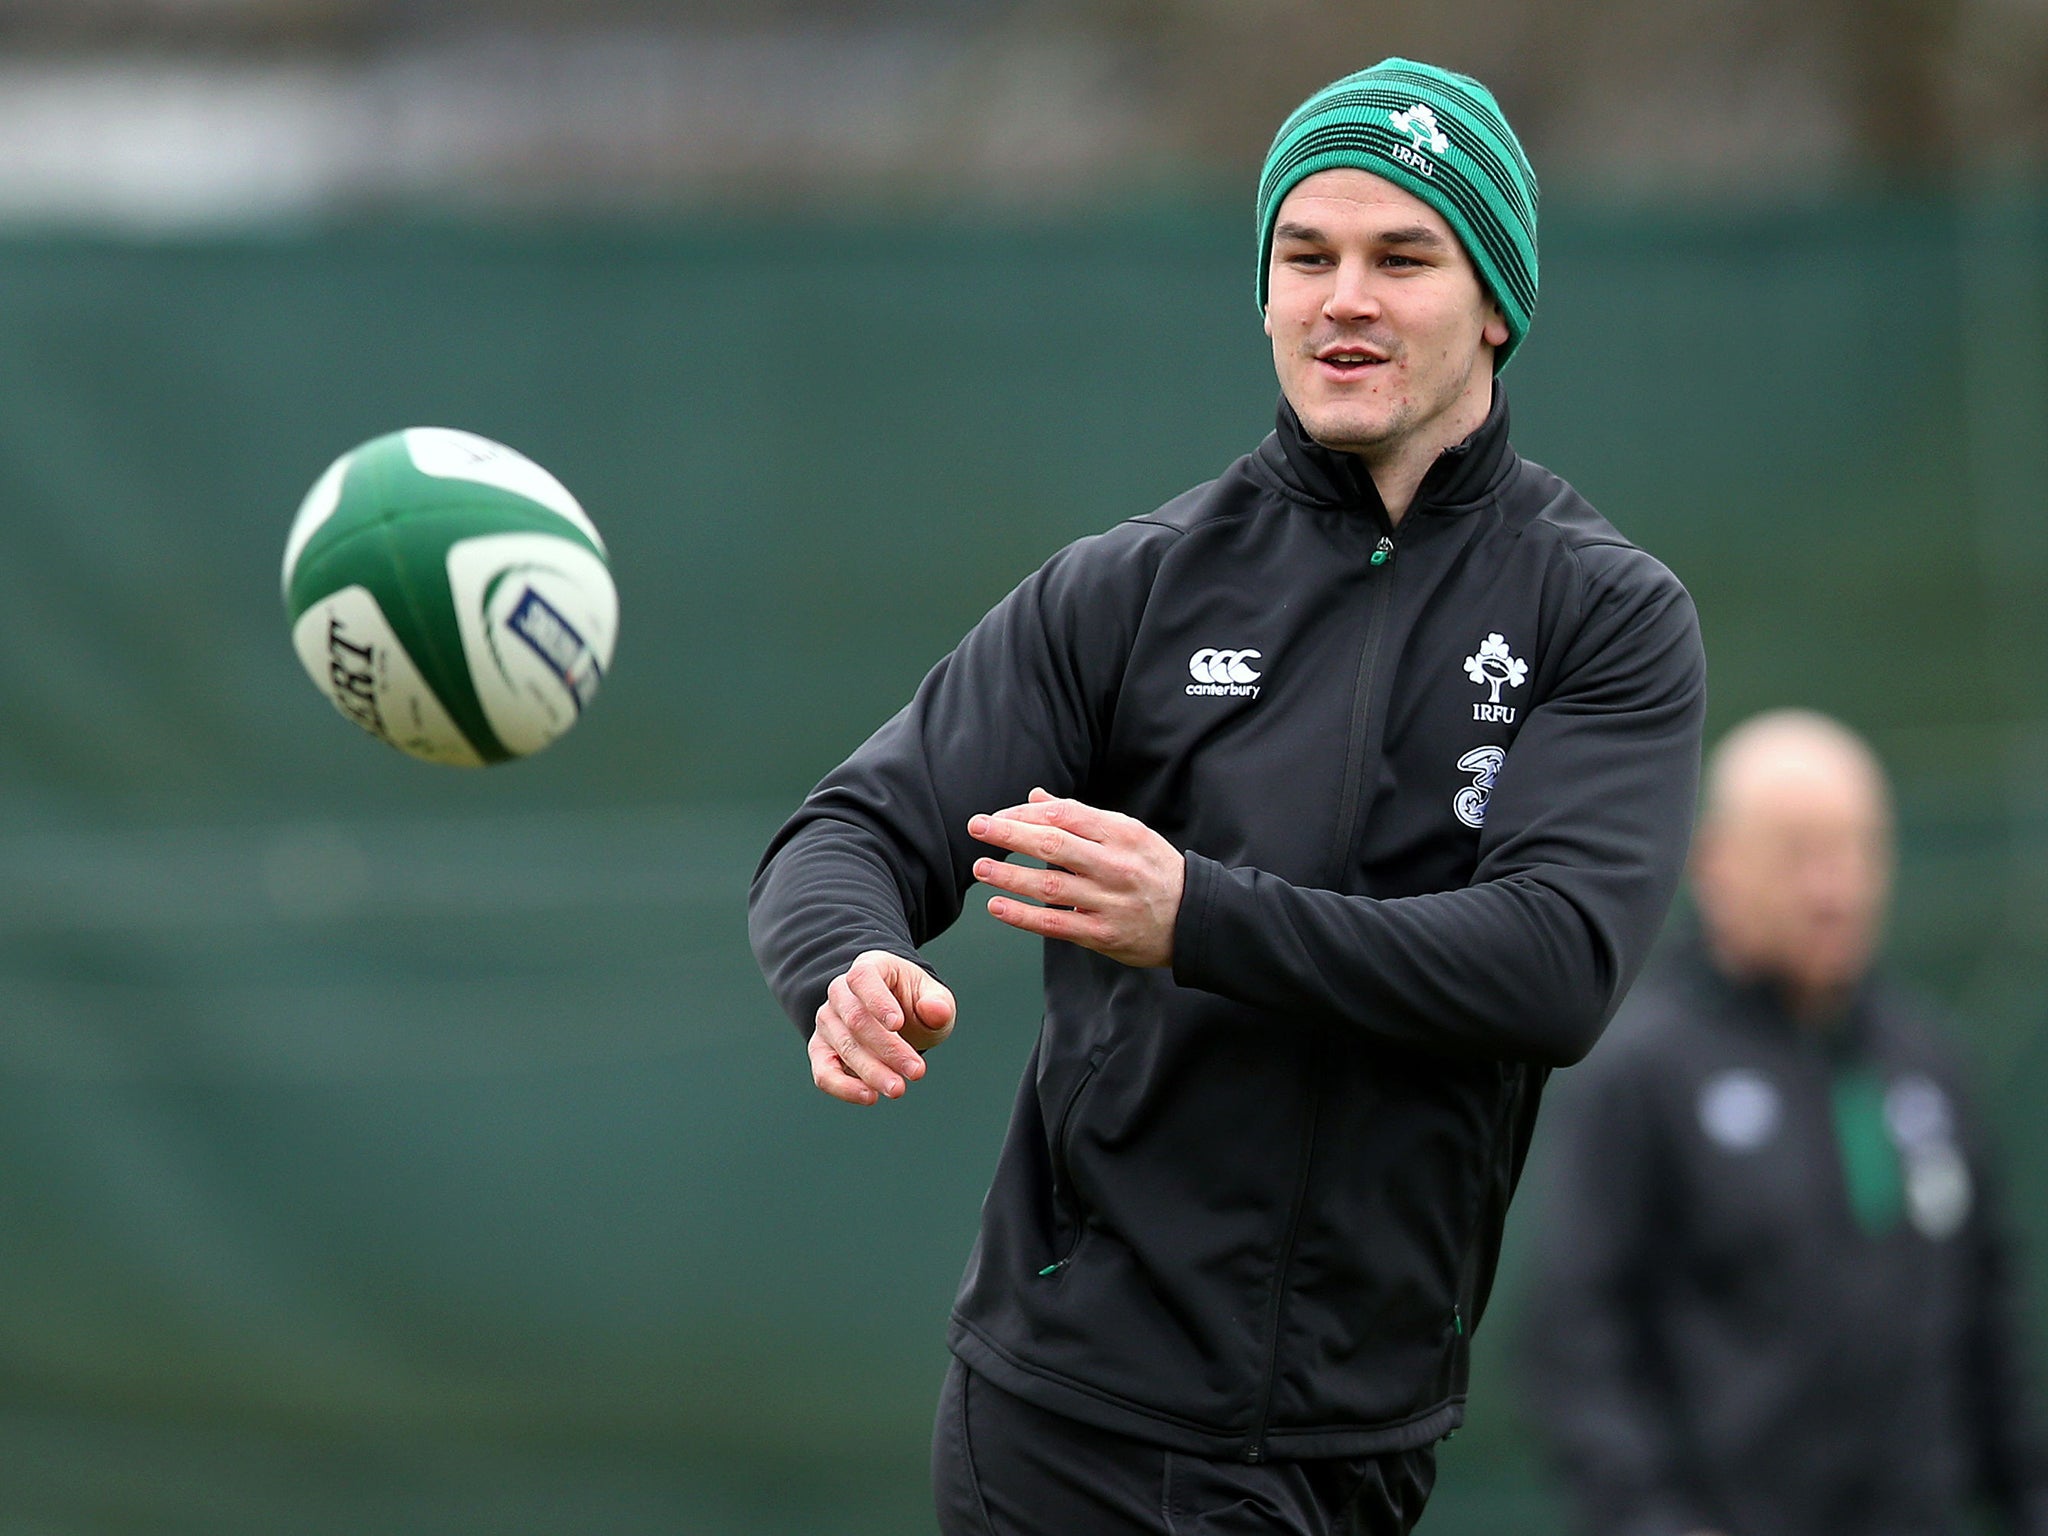 Johnny Sexton will be back for Ireland after a 12-week lay-off for concussion